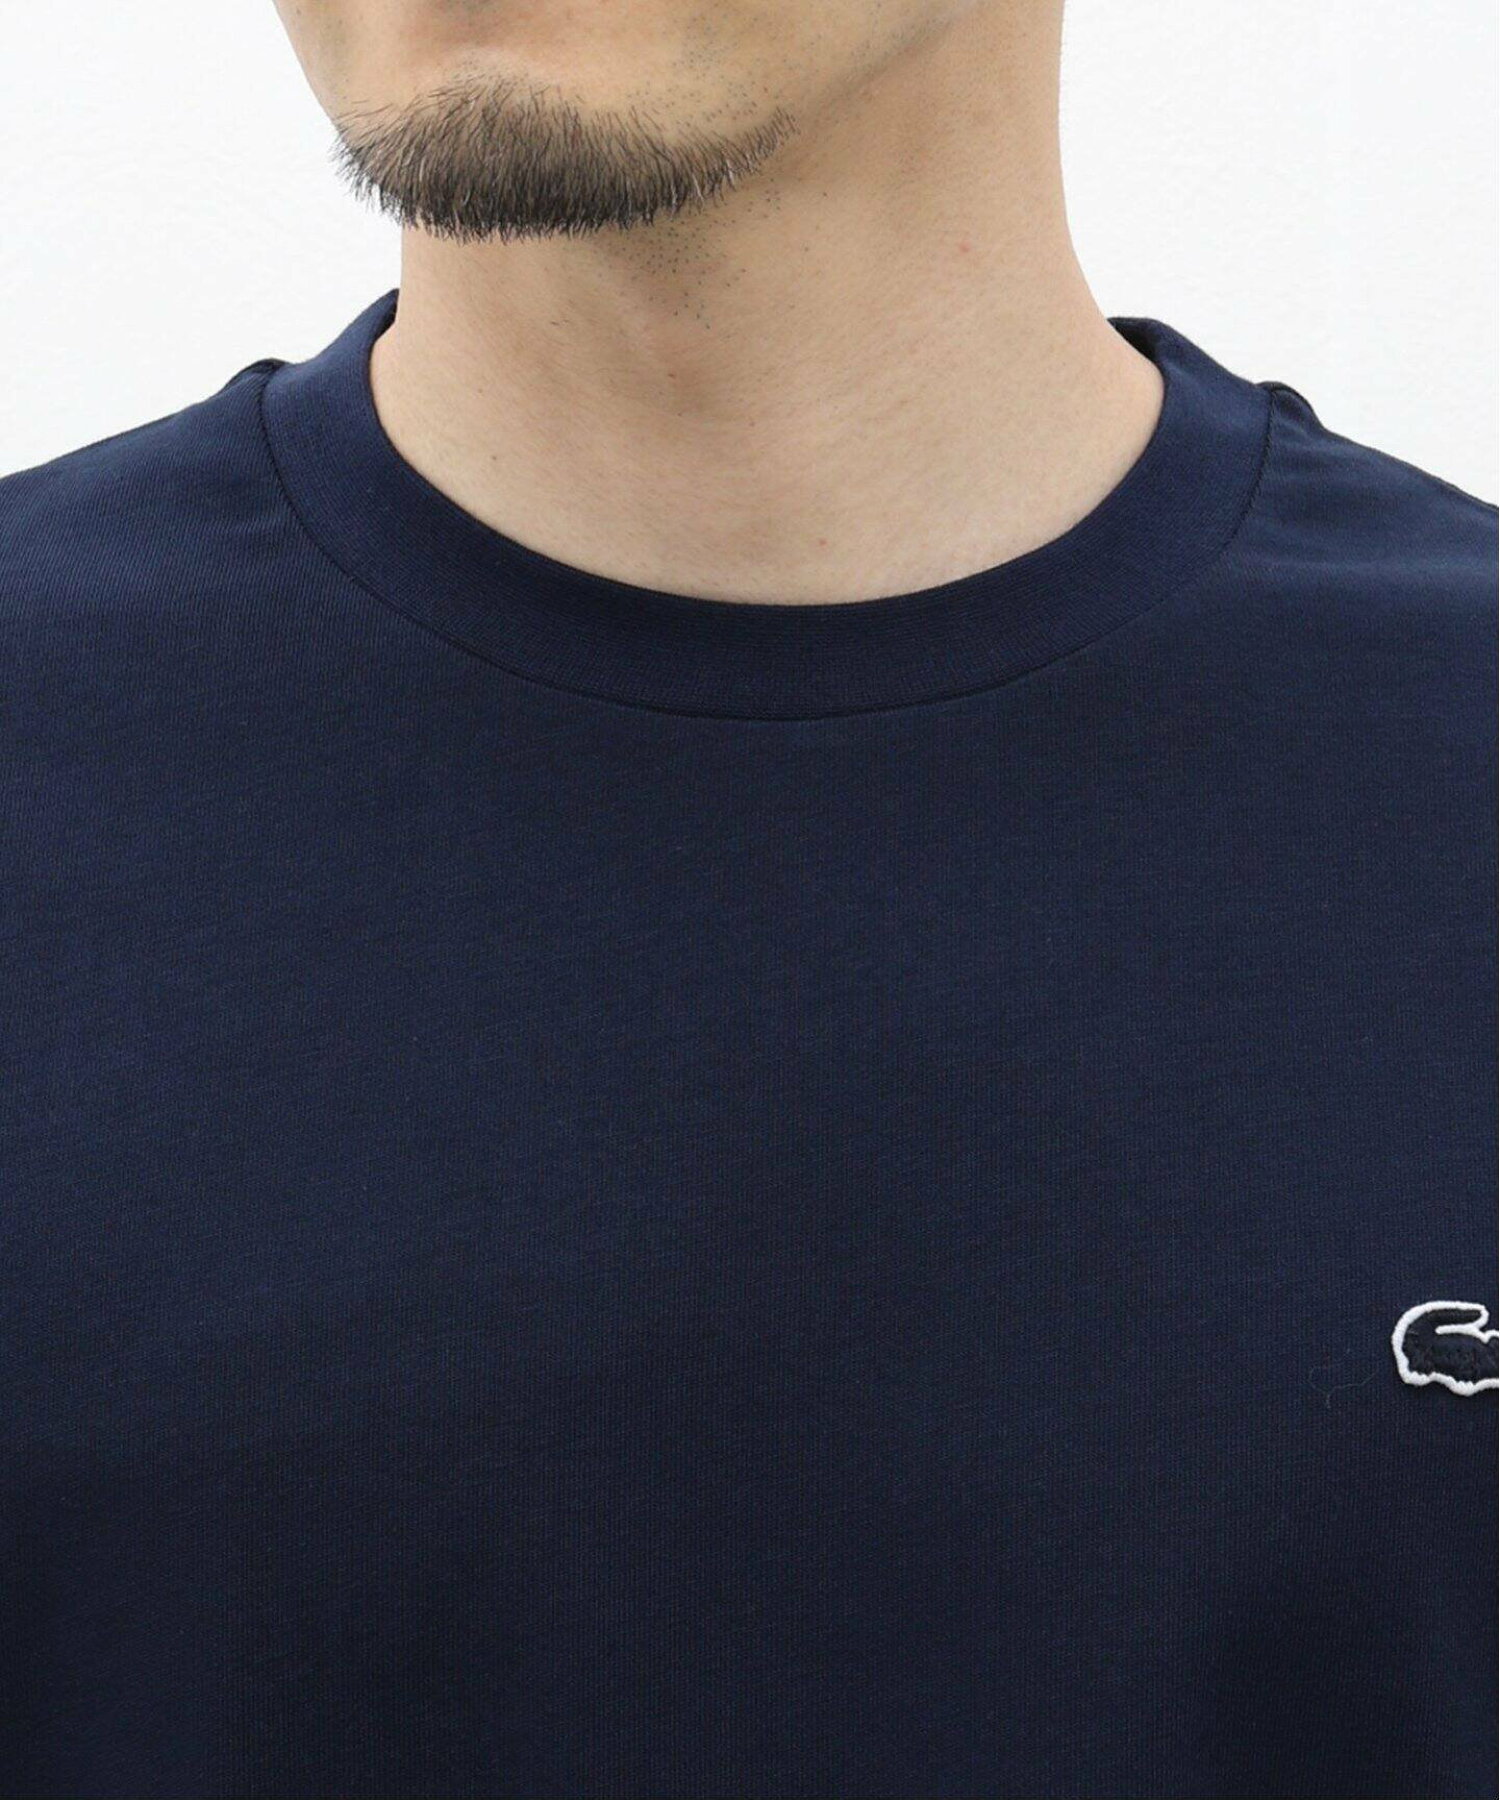 LACOSTE (ラコステ) Heavy Pique T-Shirt TH5830-99